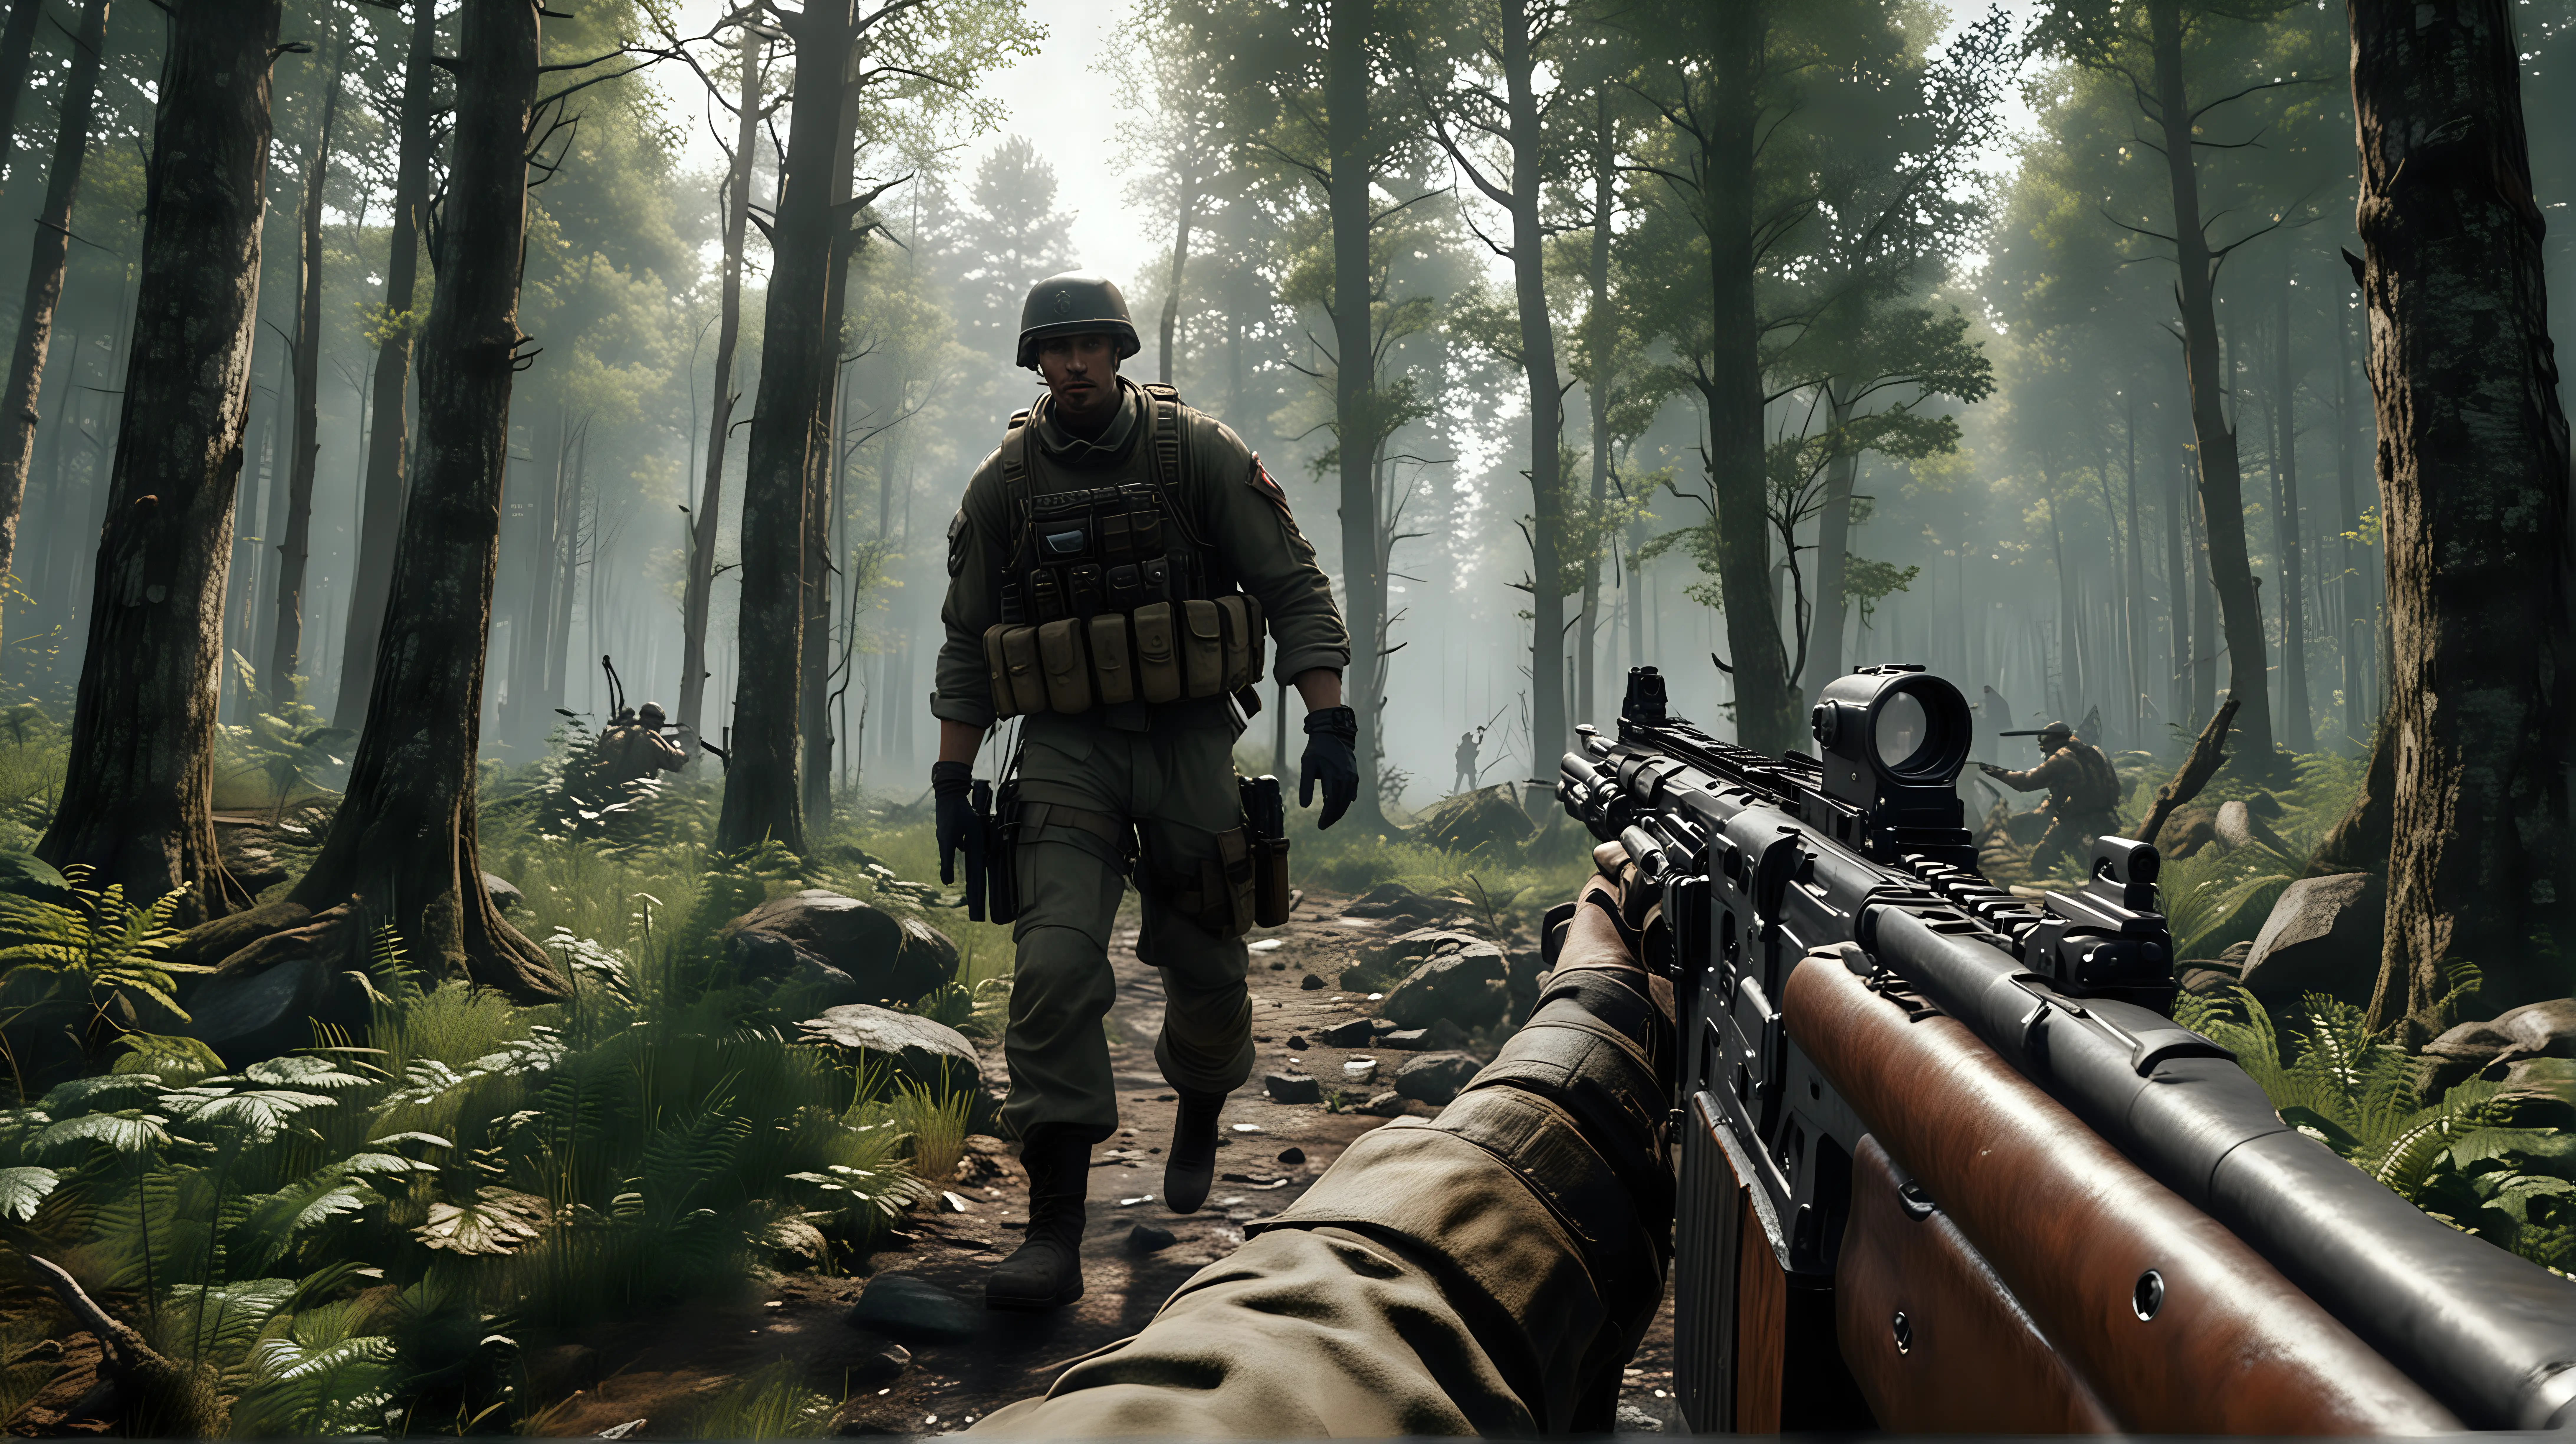 Generate a 4K hyperrealistic image of a soldier in a first person pov, with his gun in his hand shooting at enemies, in a forest environment.